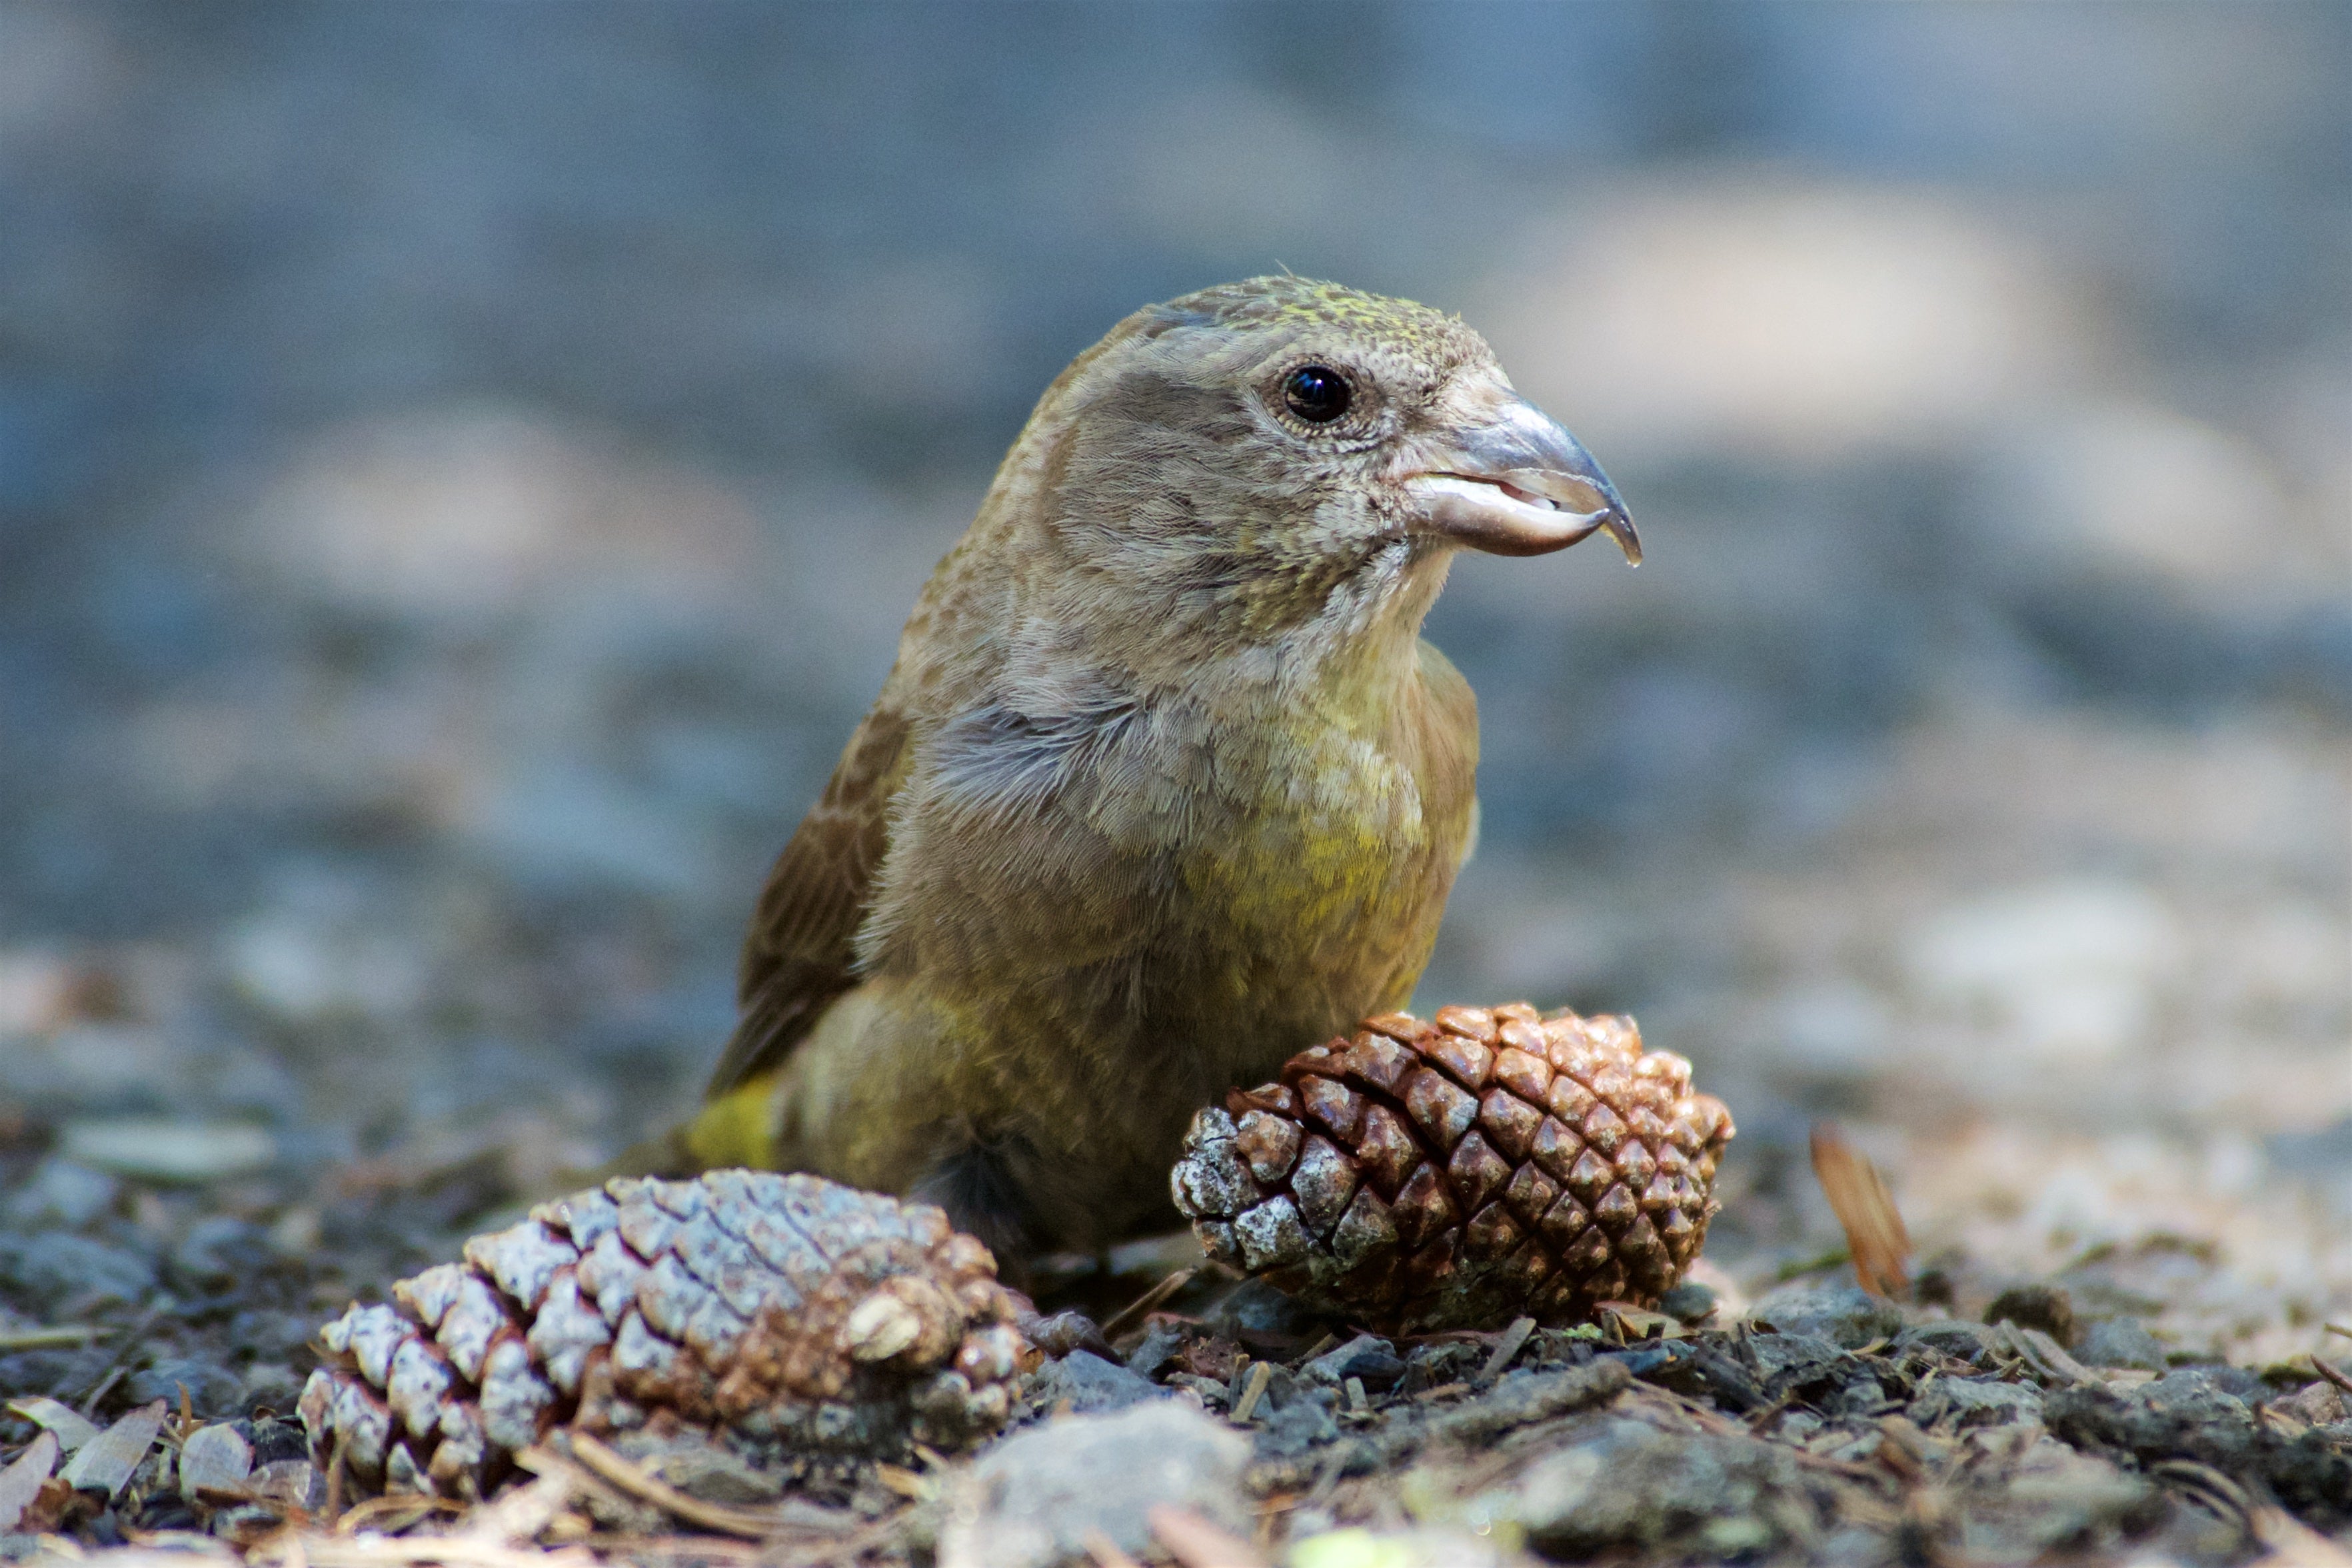 image shows an olive brown crossbill perches on the ground next to a pinecone